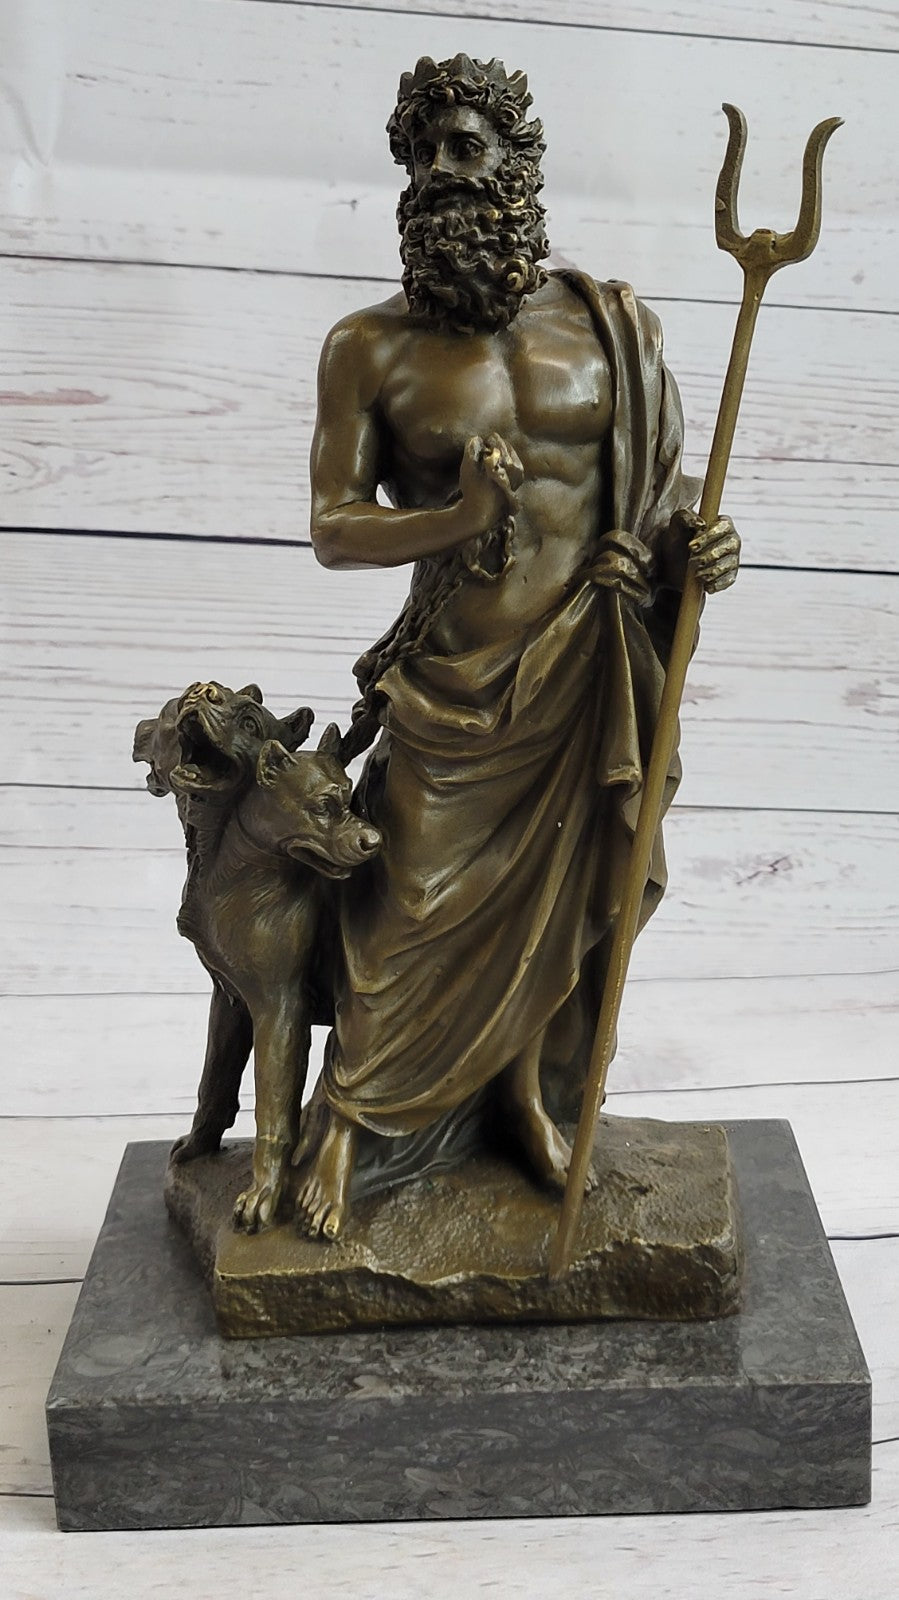 Signed Greek God Pluto With Dogs Mythical Bronze Sculpture Statue Figure Decor